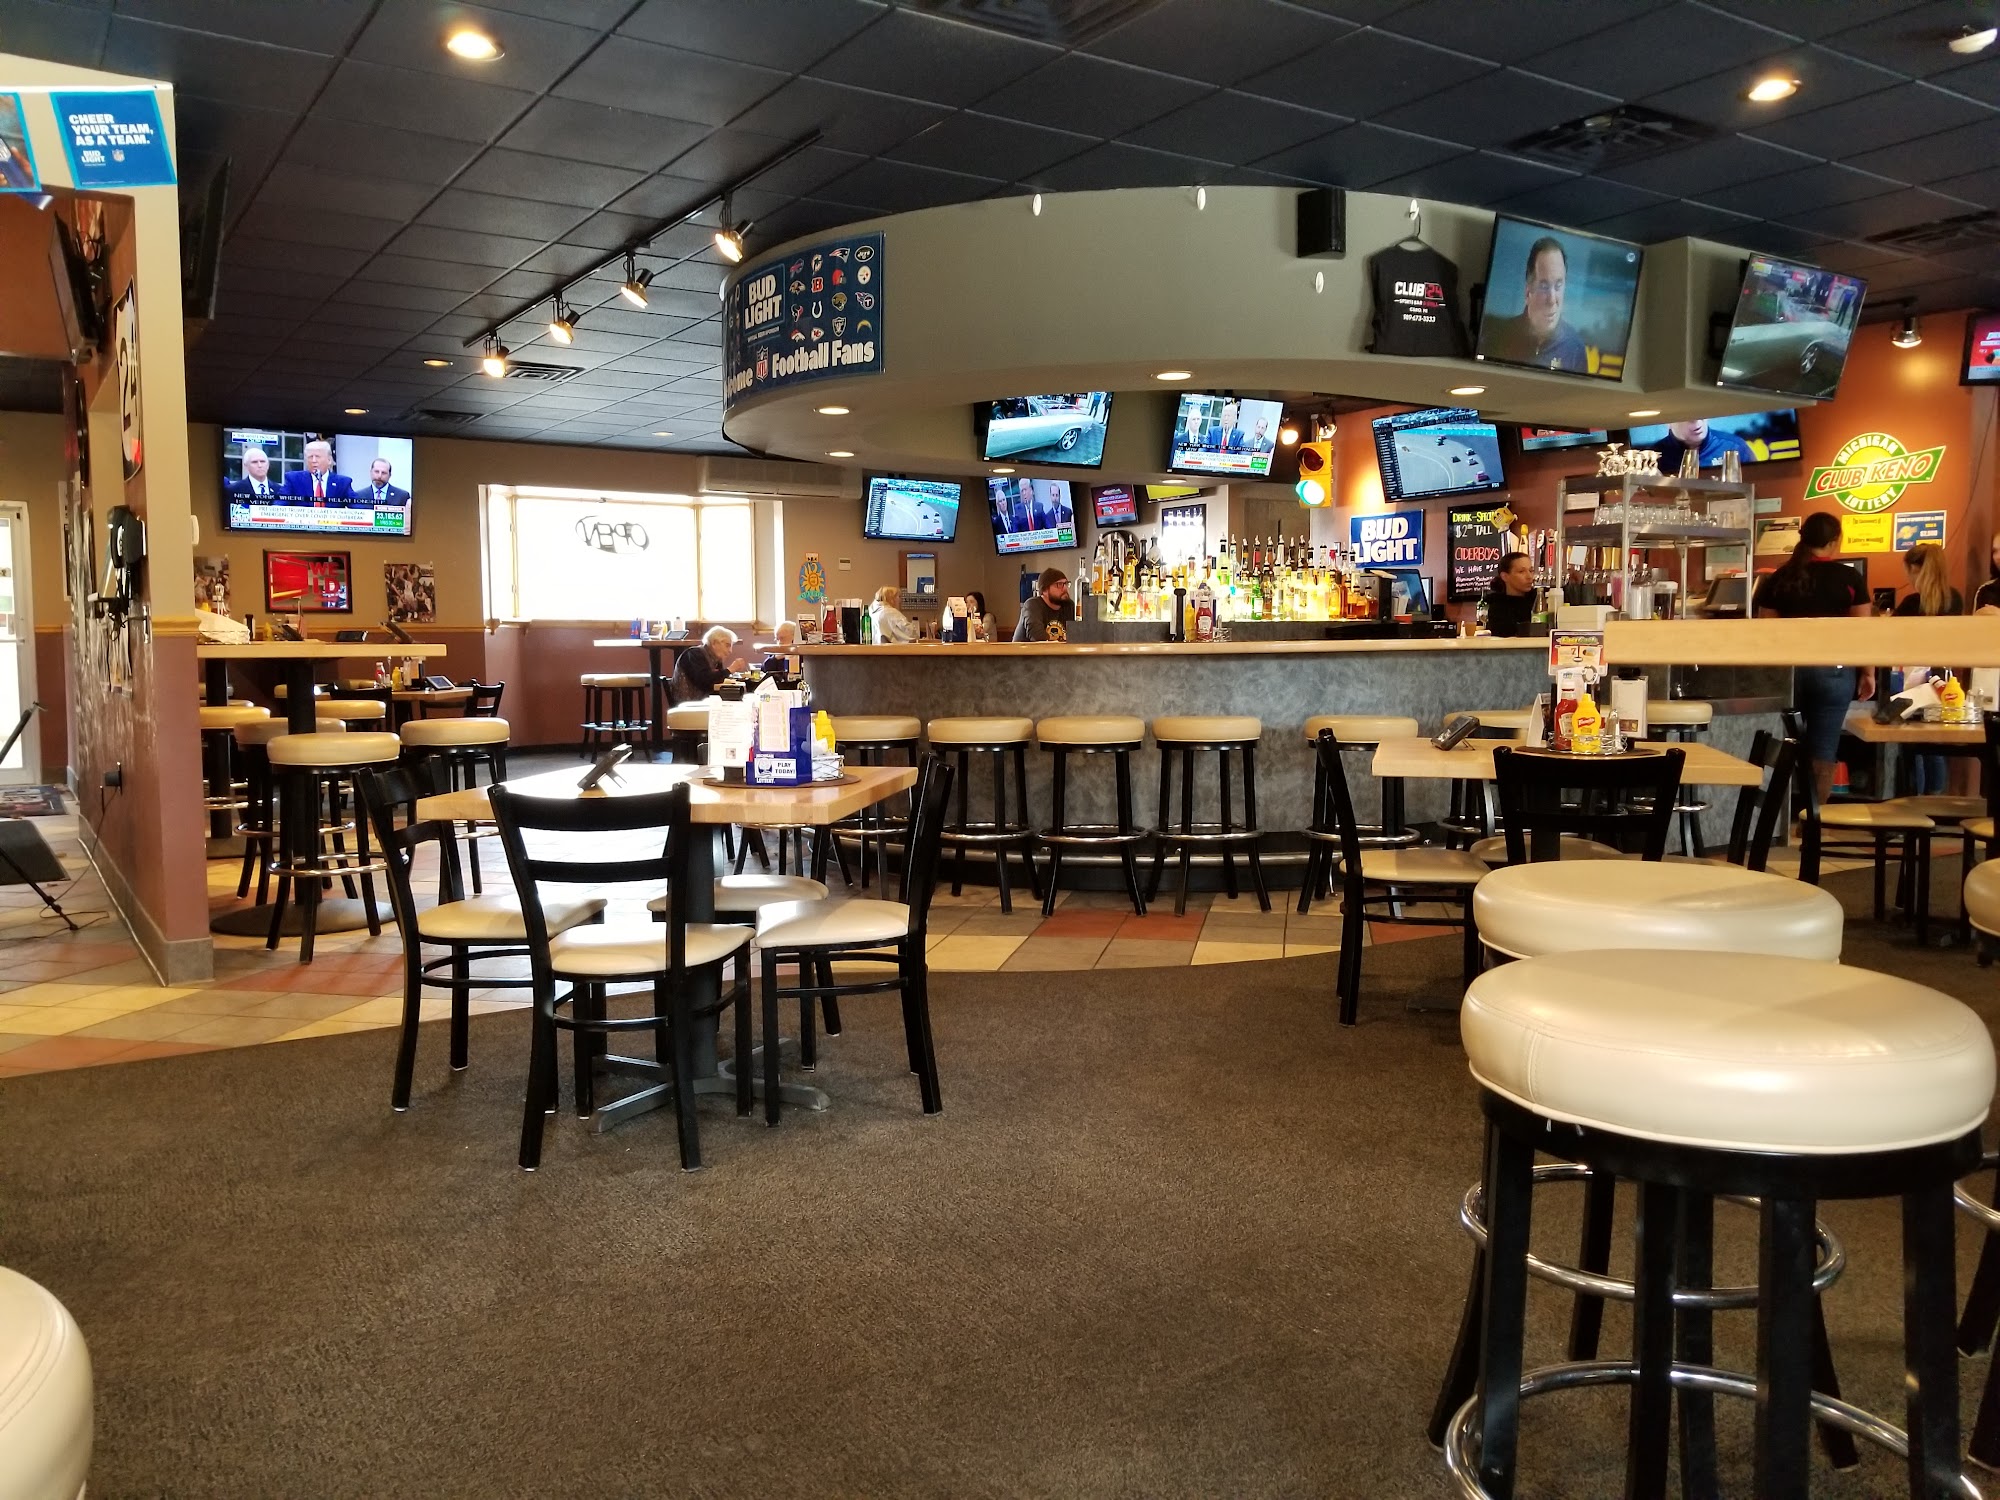 Club 24 Sports Bar and Grill